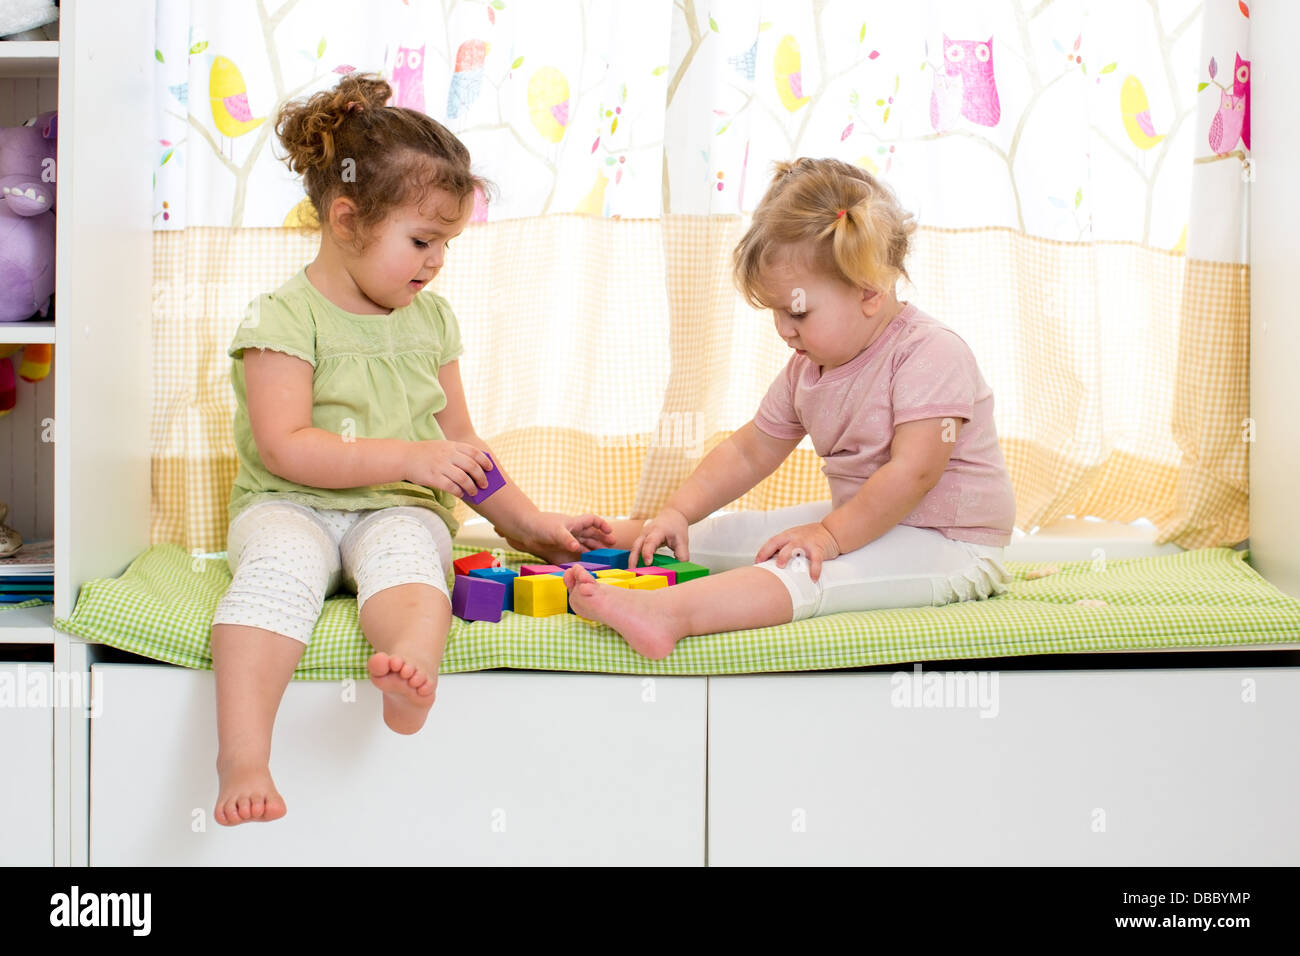 children sisters play together indoors Stock Photo